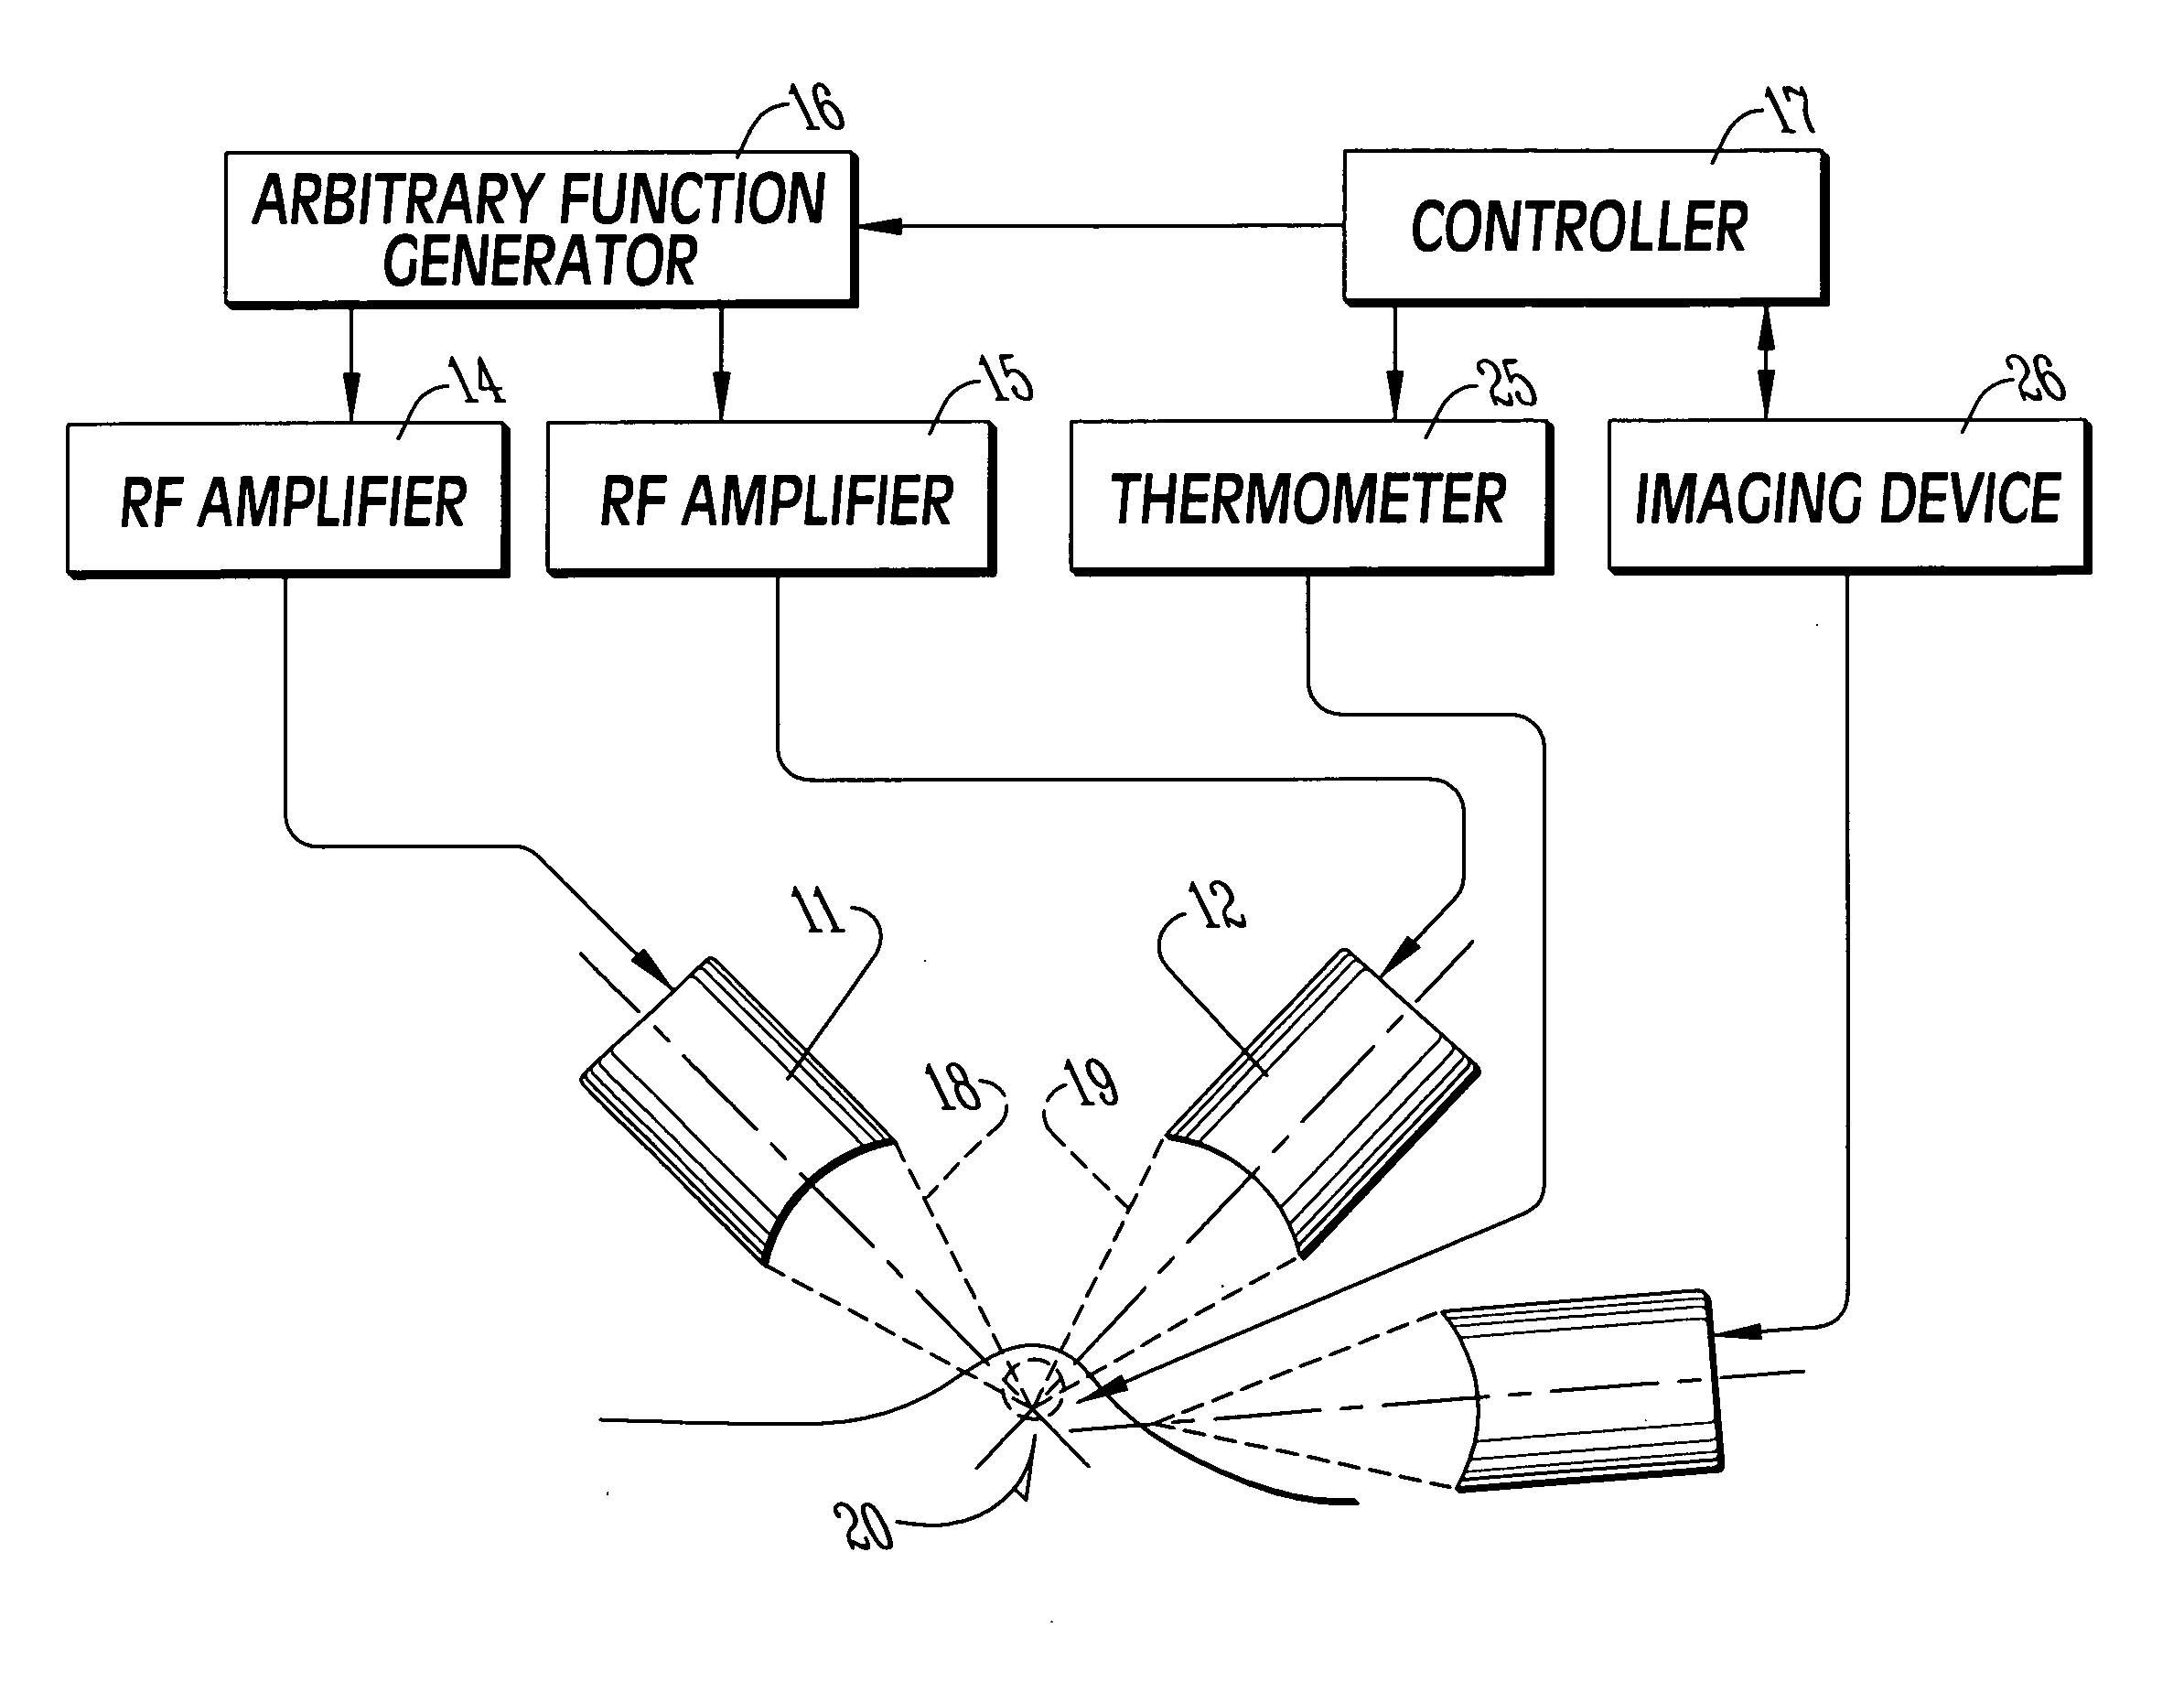 Multiple-angle switched high intensity focused ultrasound